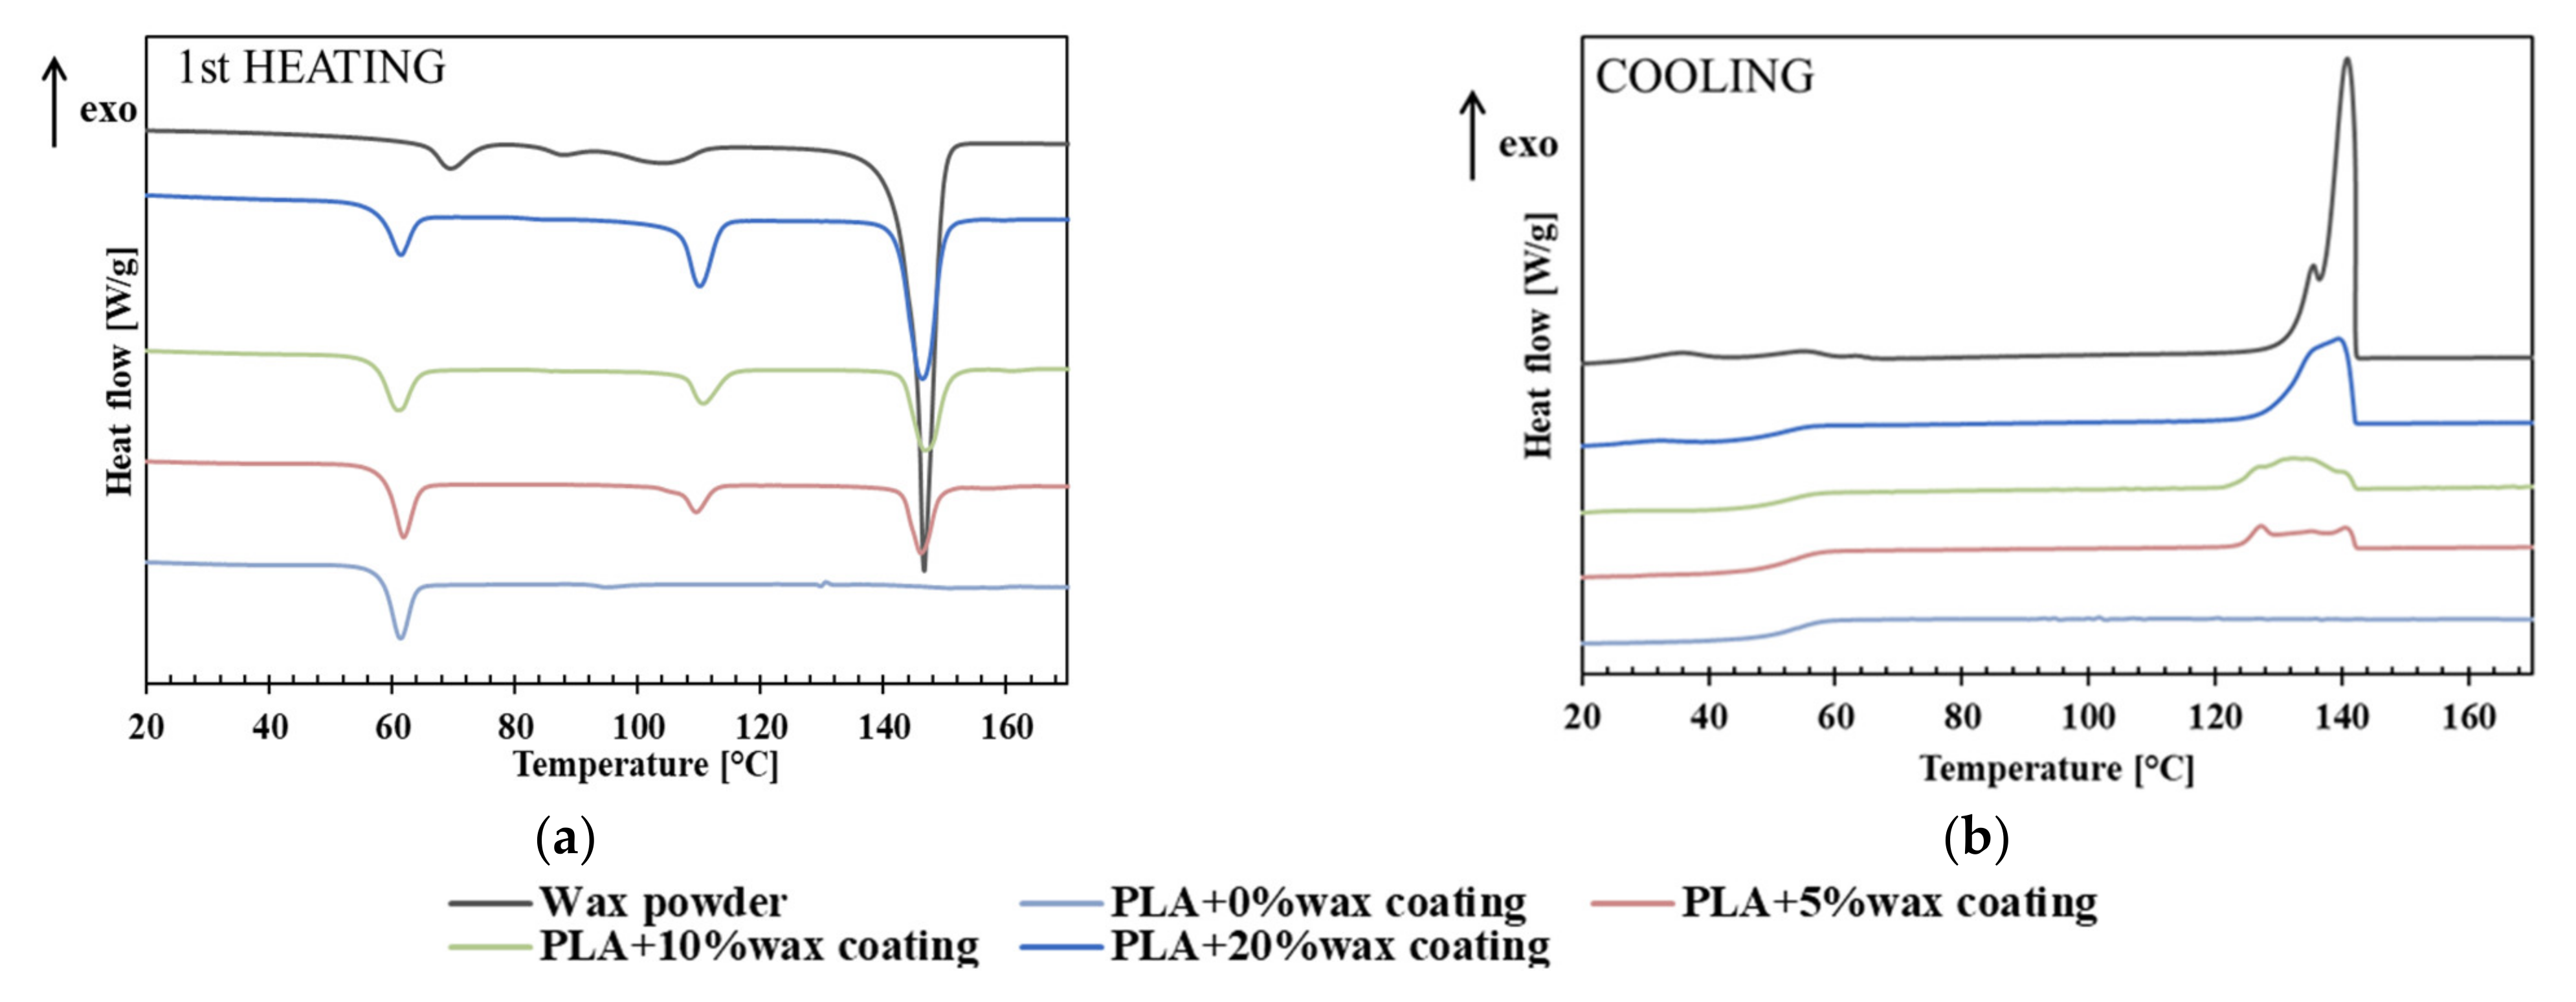 Polymers | Free Full-Text | Effect of PVOH/PLA + Wax Coatings on ...